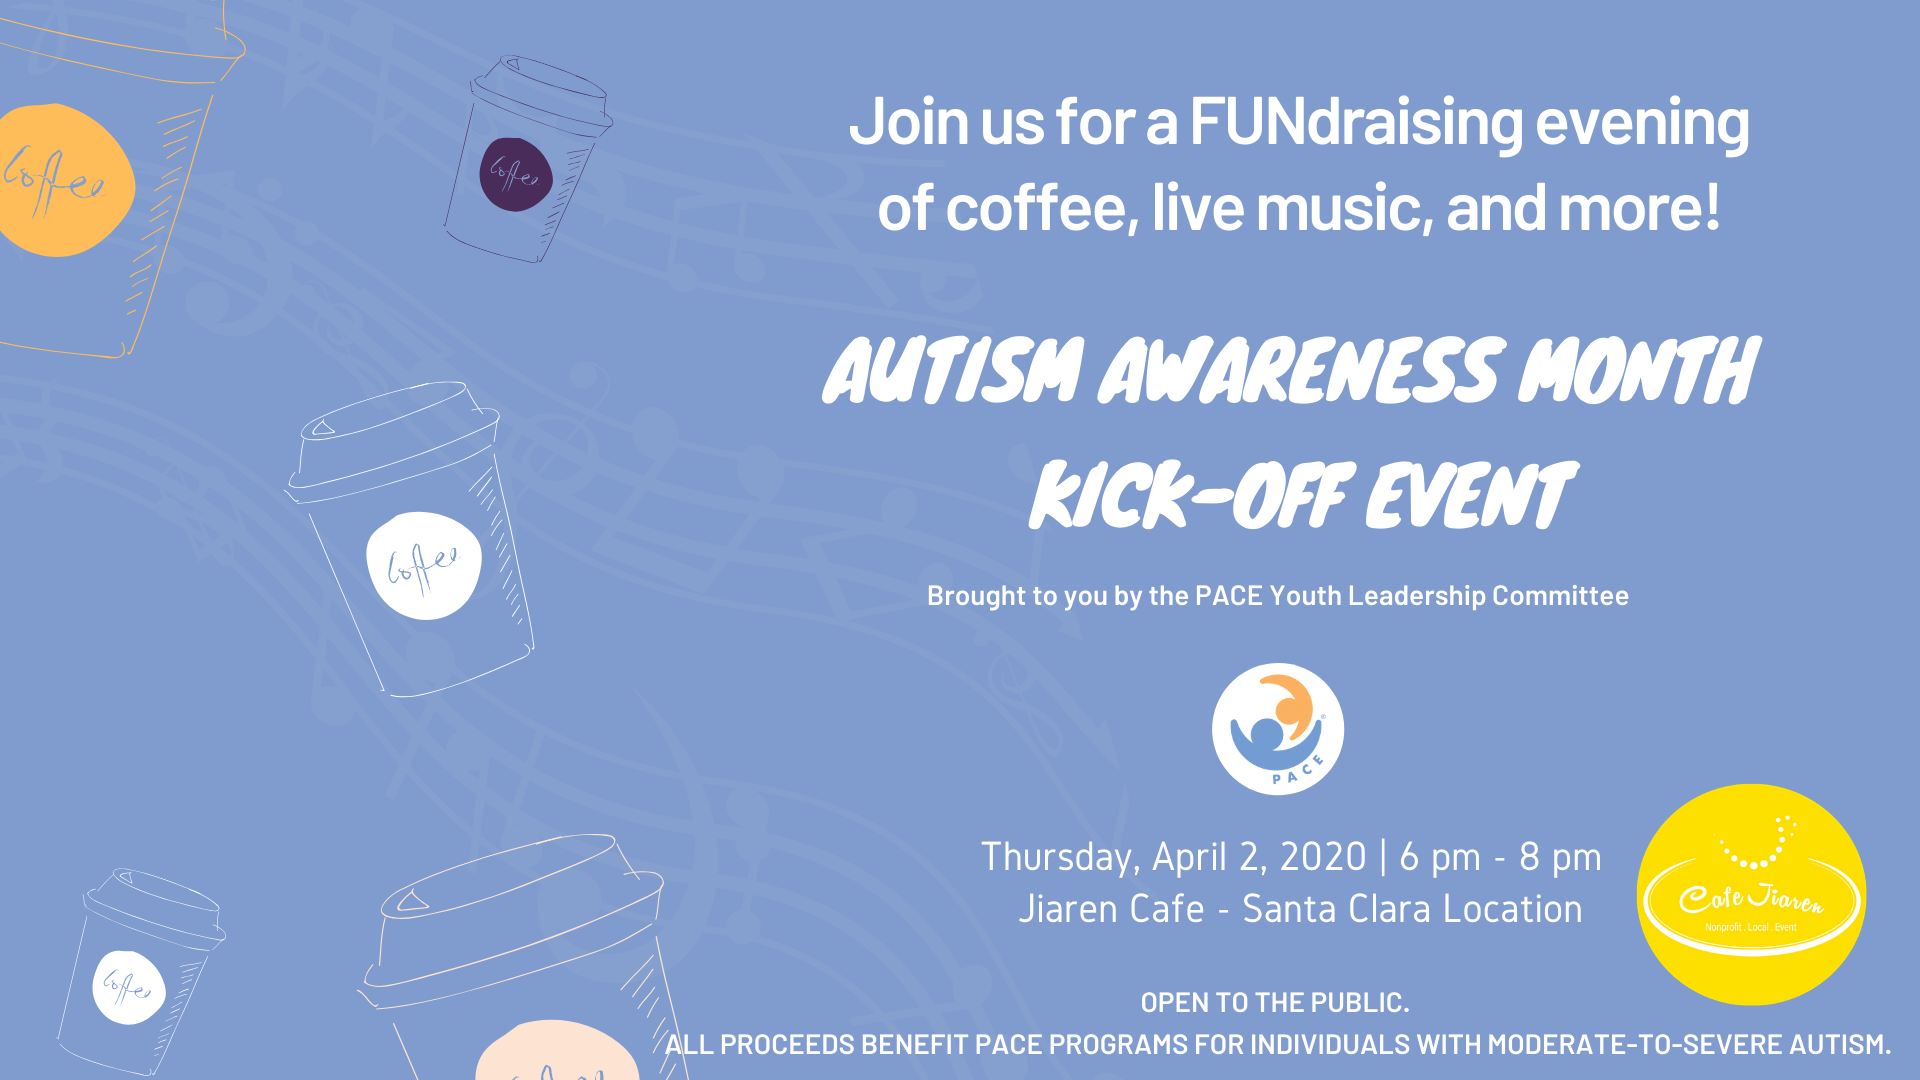 Coffee, live music fundraiser to help kick off Autism Awareness Month.